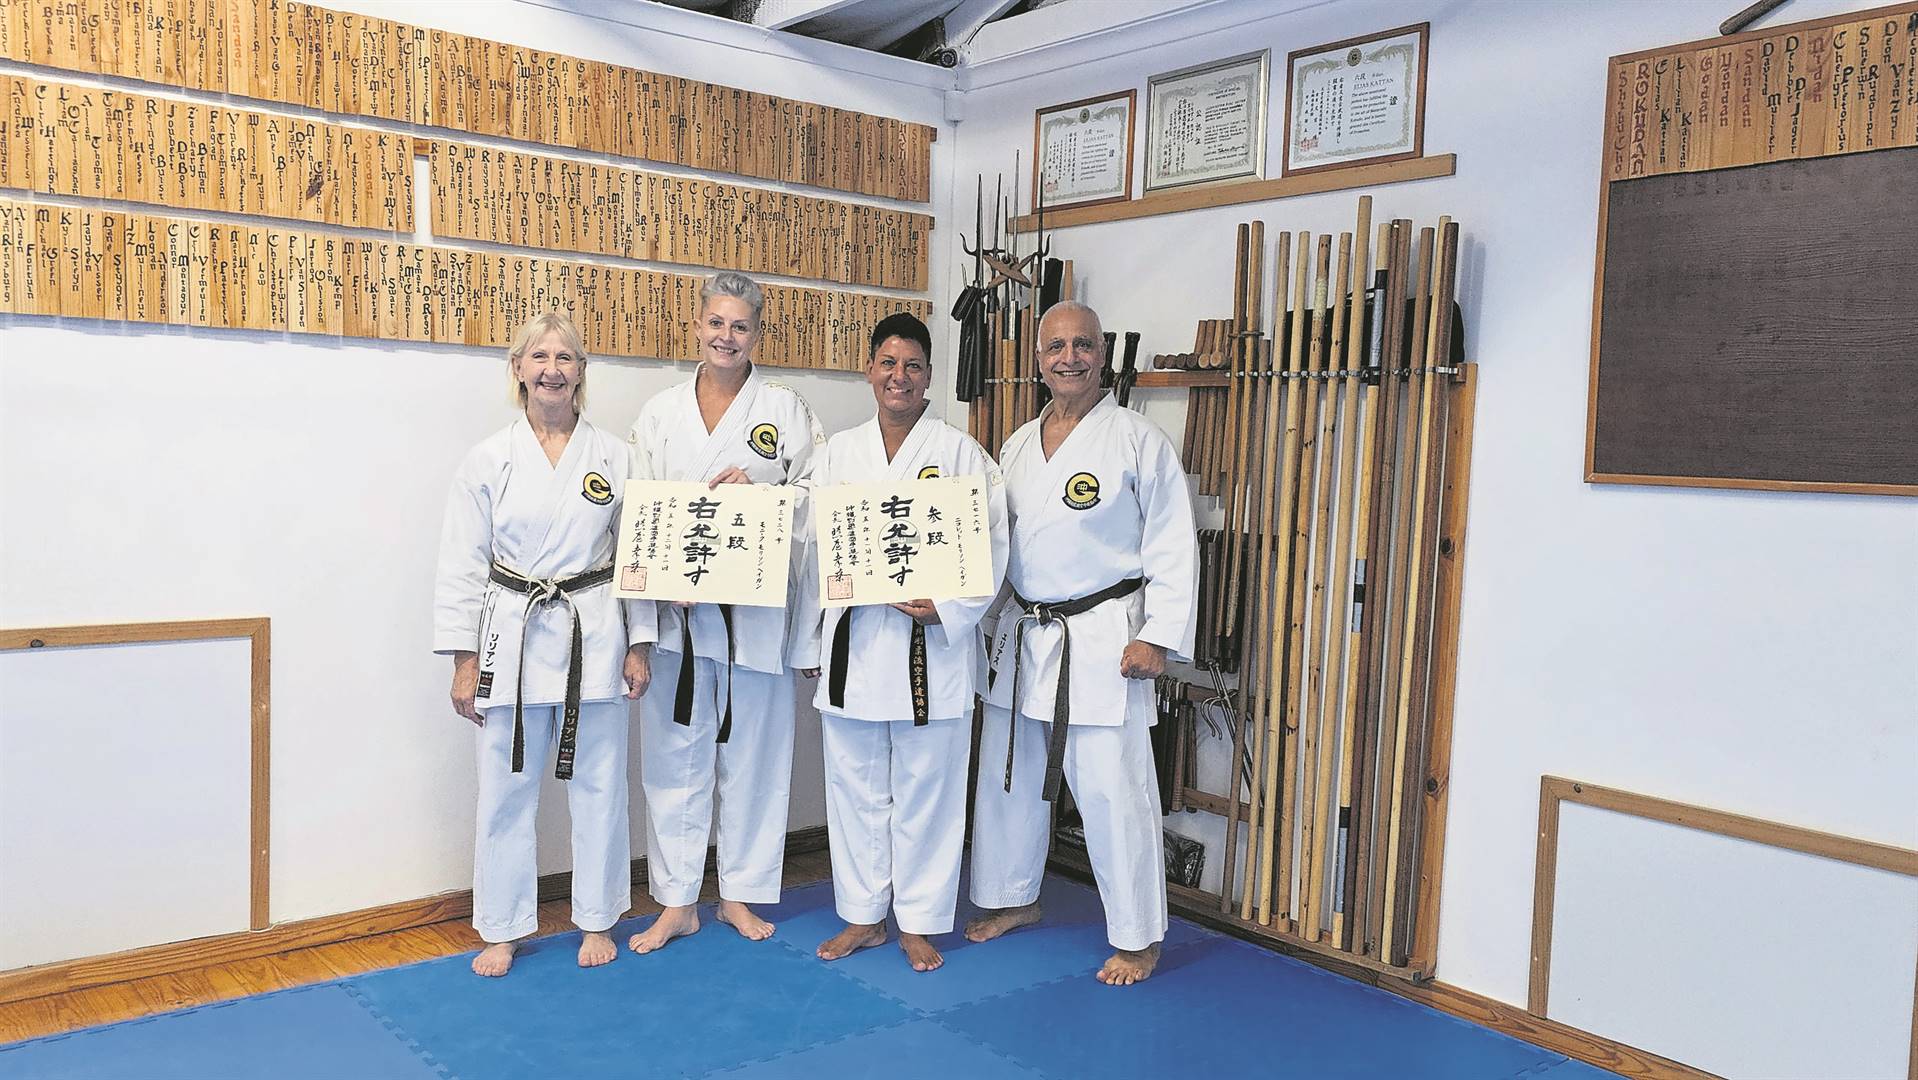 Senseis Monique (OGKK 5th dan) and Nicolette Morrison-Hagen (OGKK 3rd Dan and 2nd Dan in Kobudo) with their authentic Okinawan certificates at the handover ceremony. With them are their senseis Lilian and Elias Kattan (both 8th Dan). FOTO: 